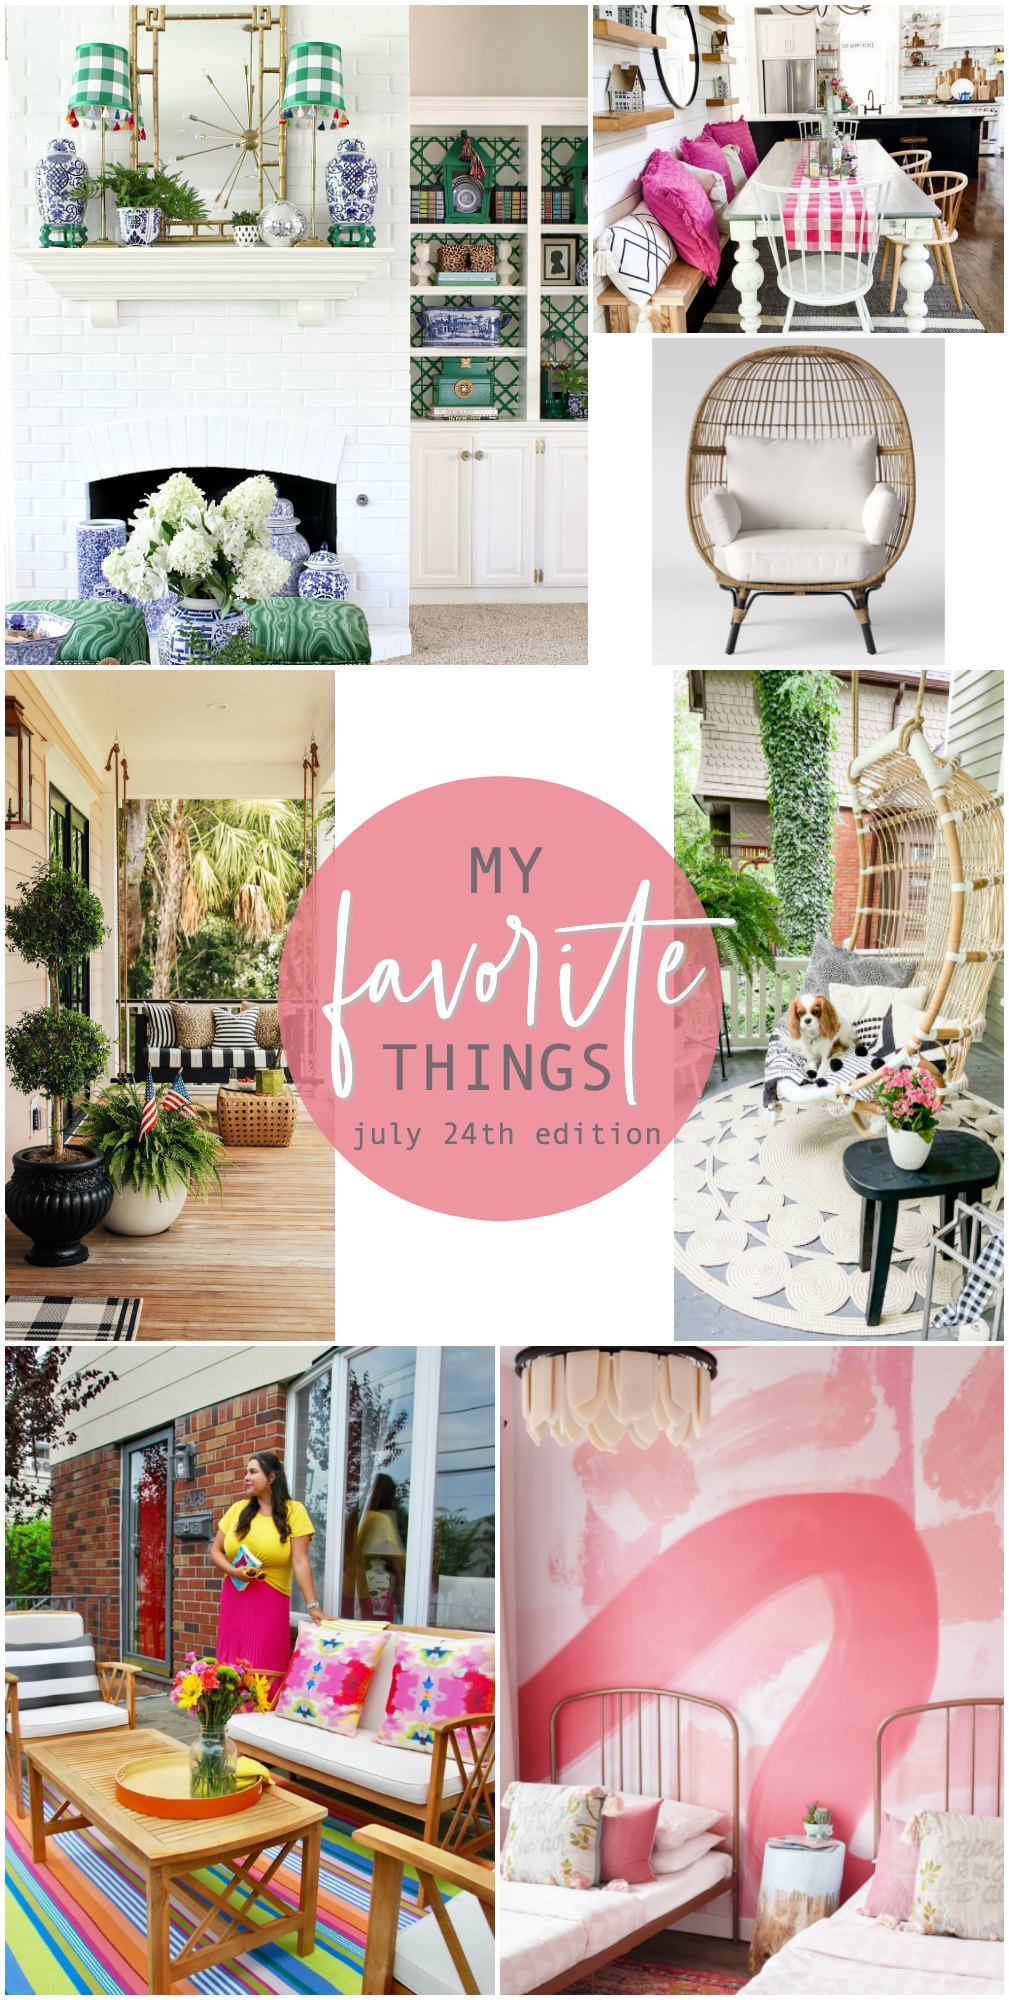 Favorite Things of the Week! I'm sharing my favorite projects, finds and what is making me smile this week!